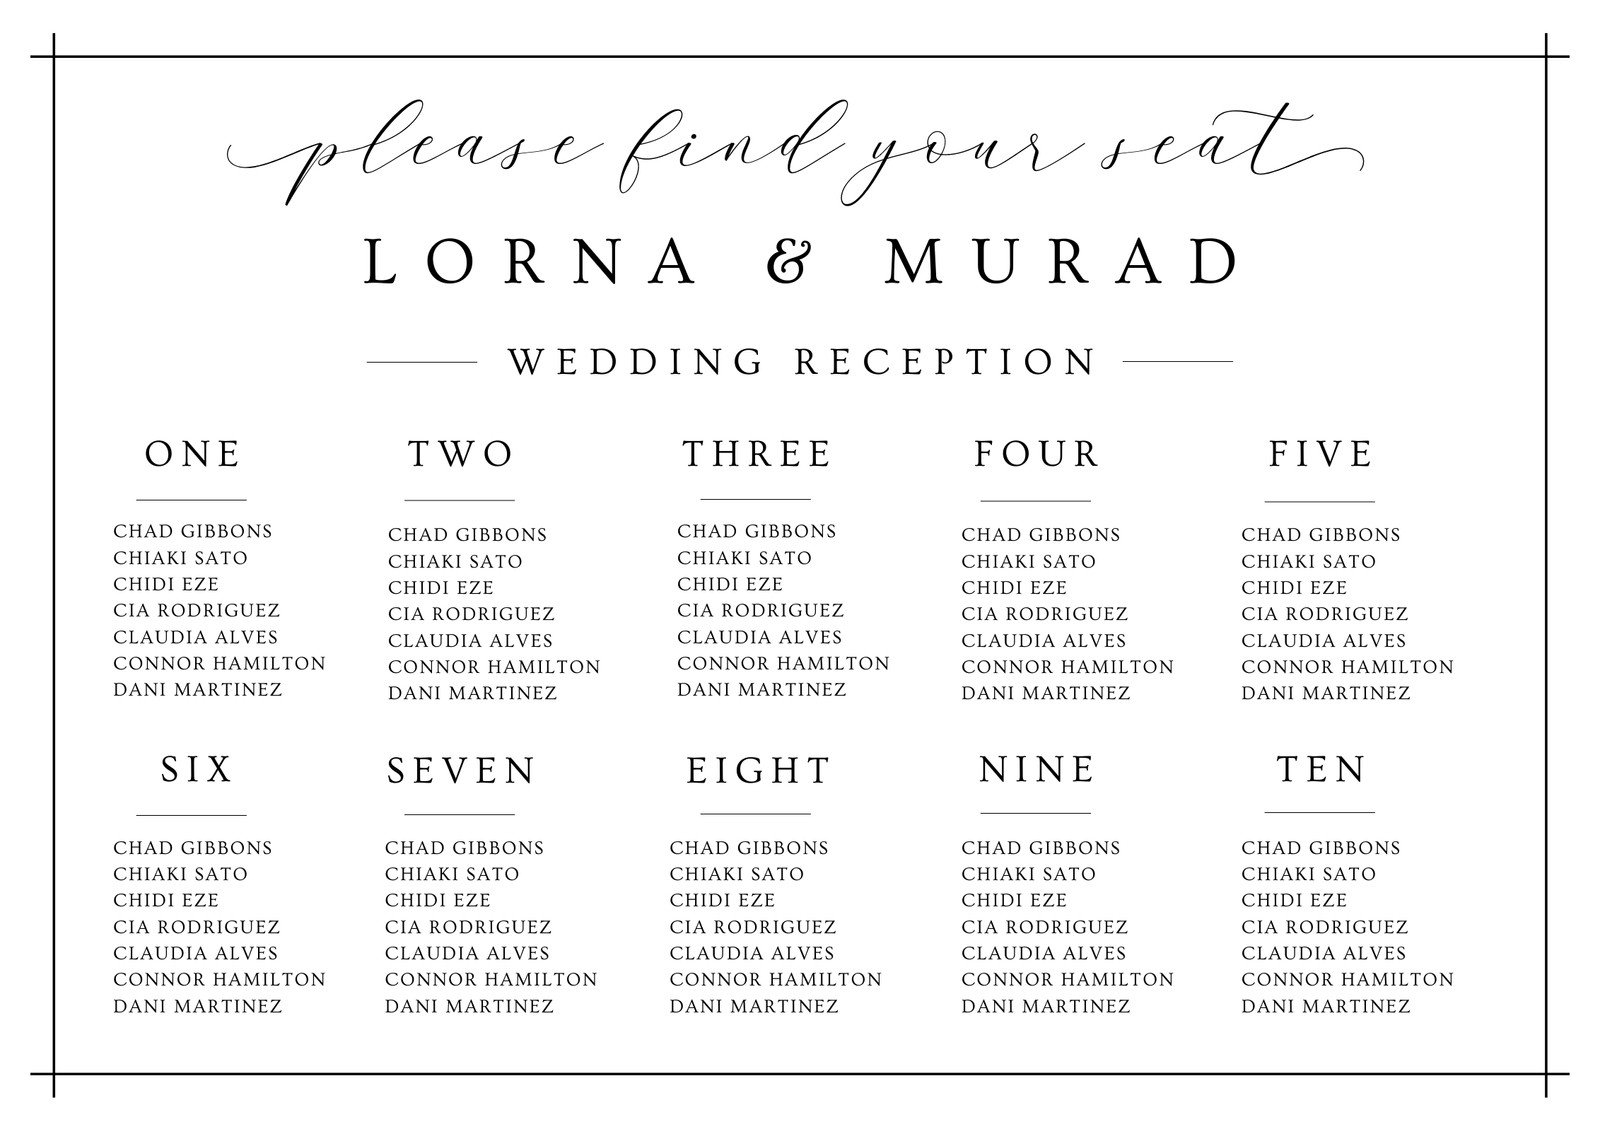 find-your-seat-sign-wedding-table-plan-personalised-wedding-seating-plan-modern-wedding